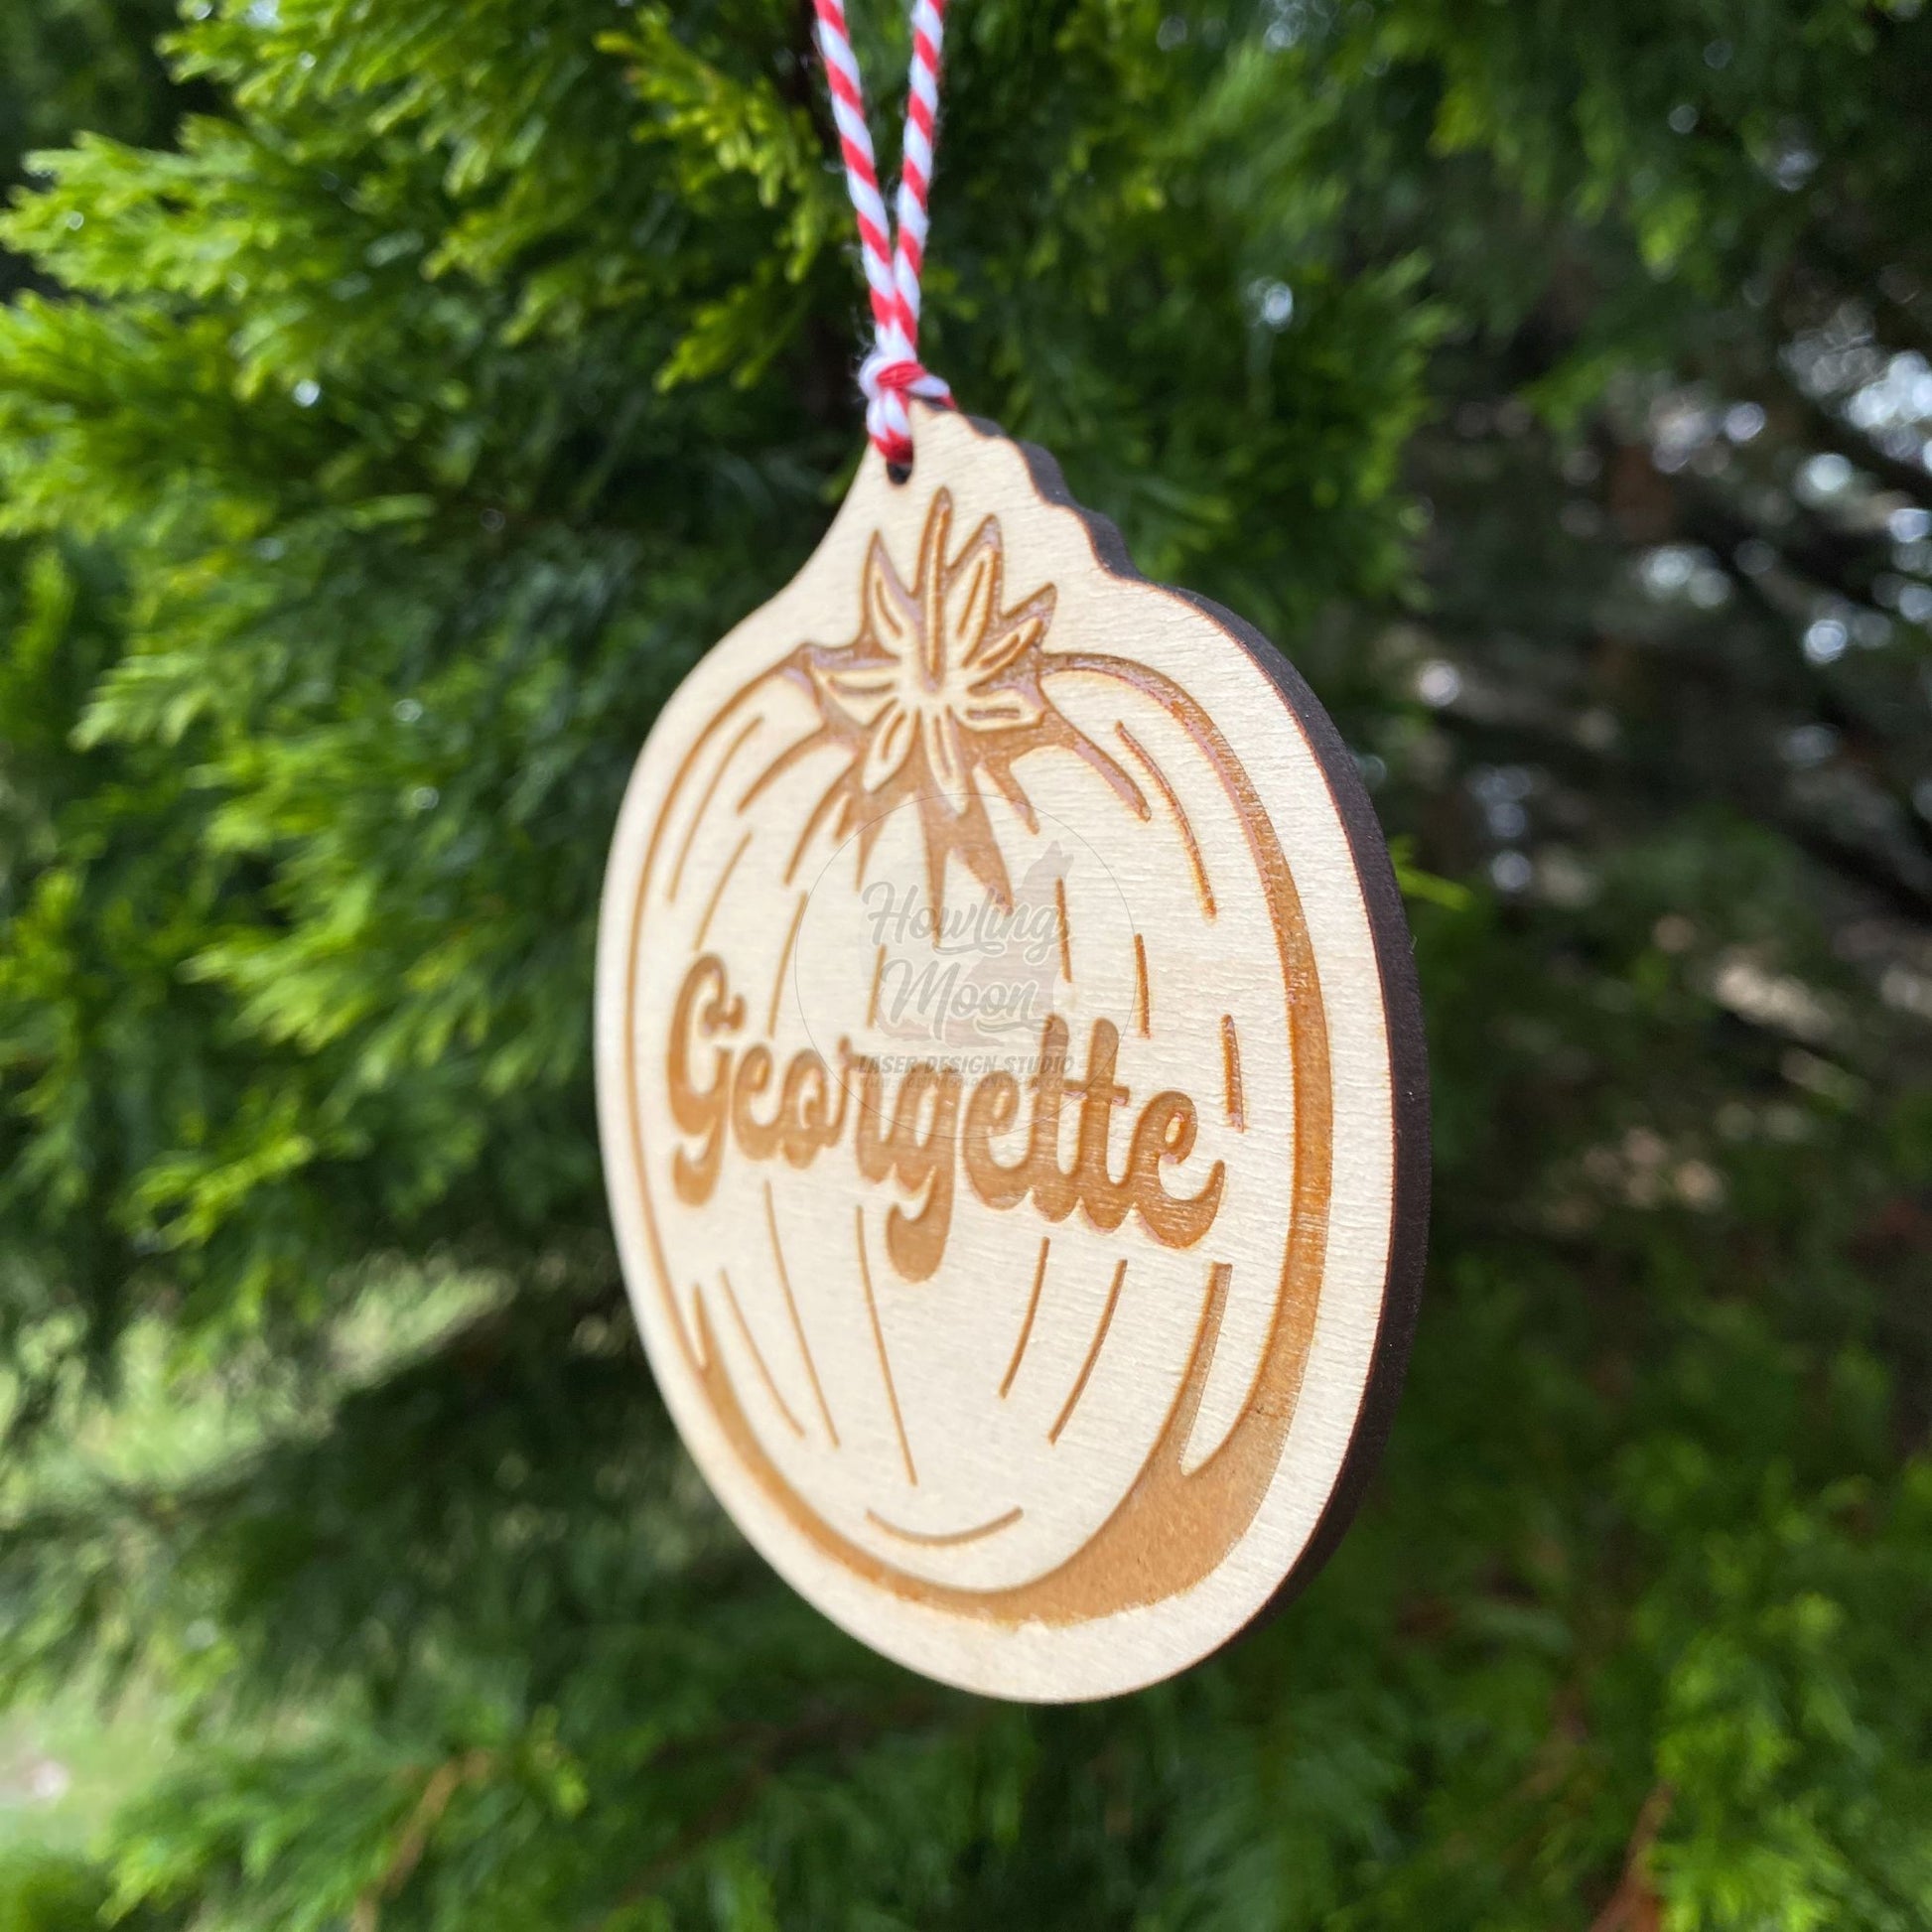 Side view of Personalized Tomato Ornament from Howling Moon Laser Design in Virginia, USA